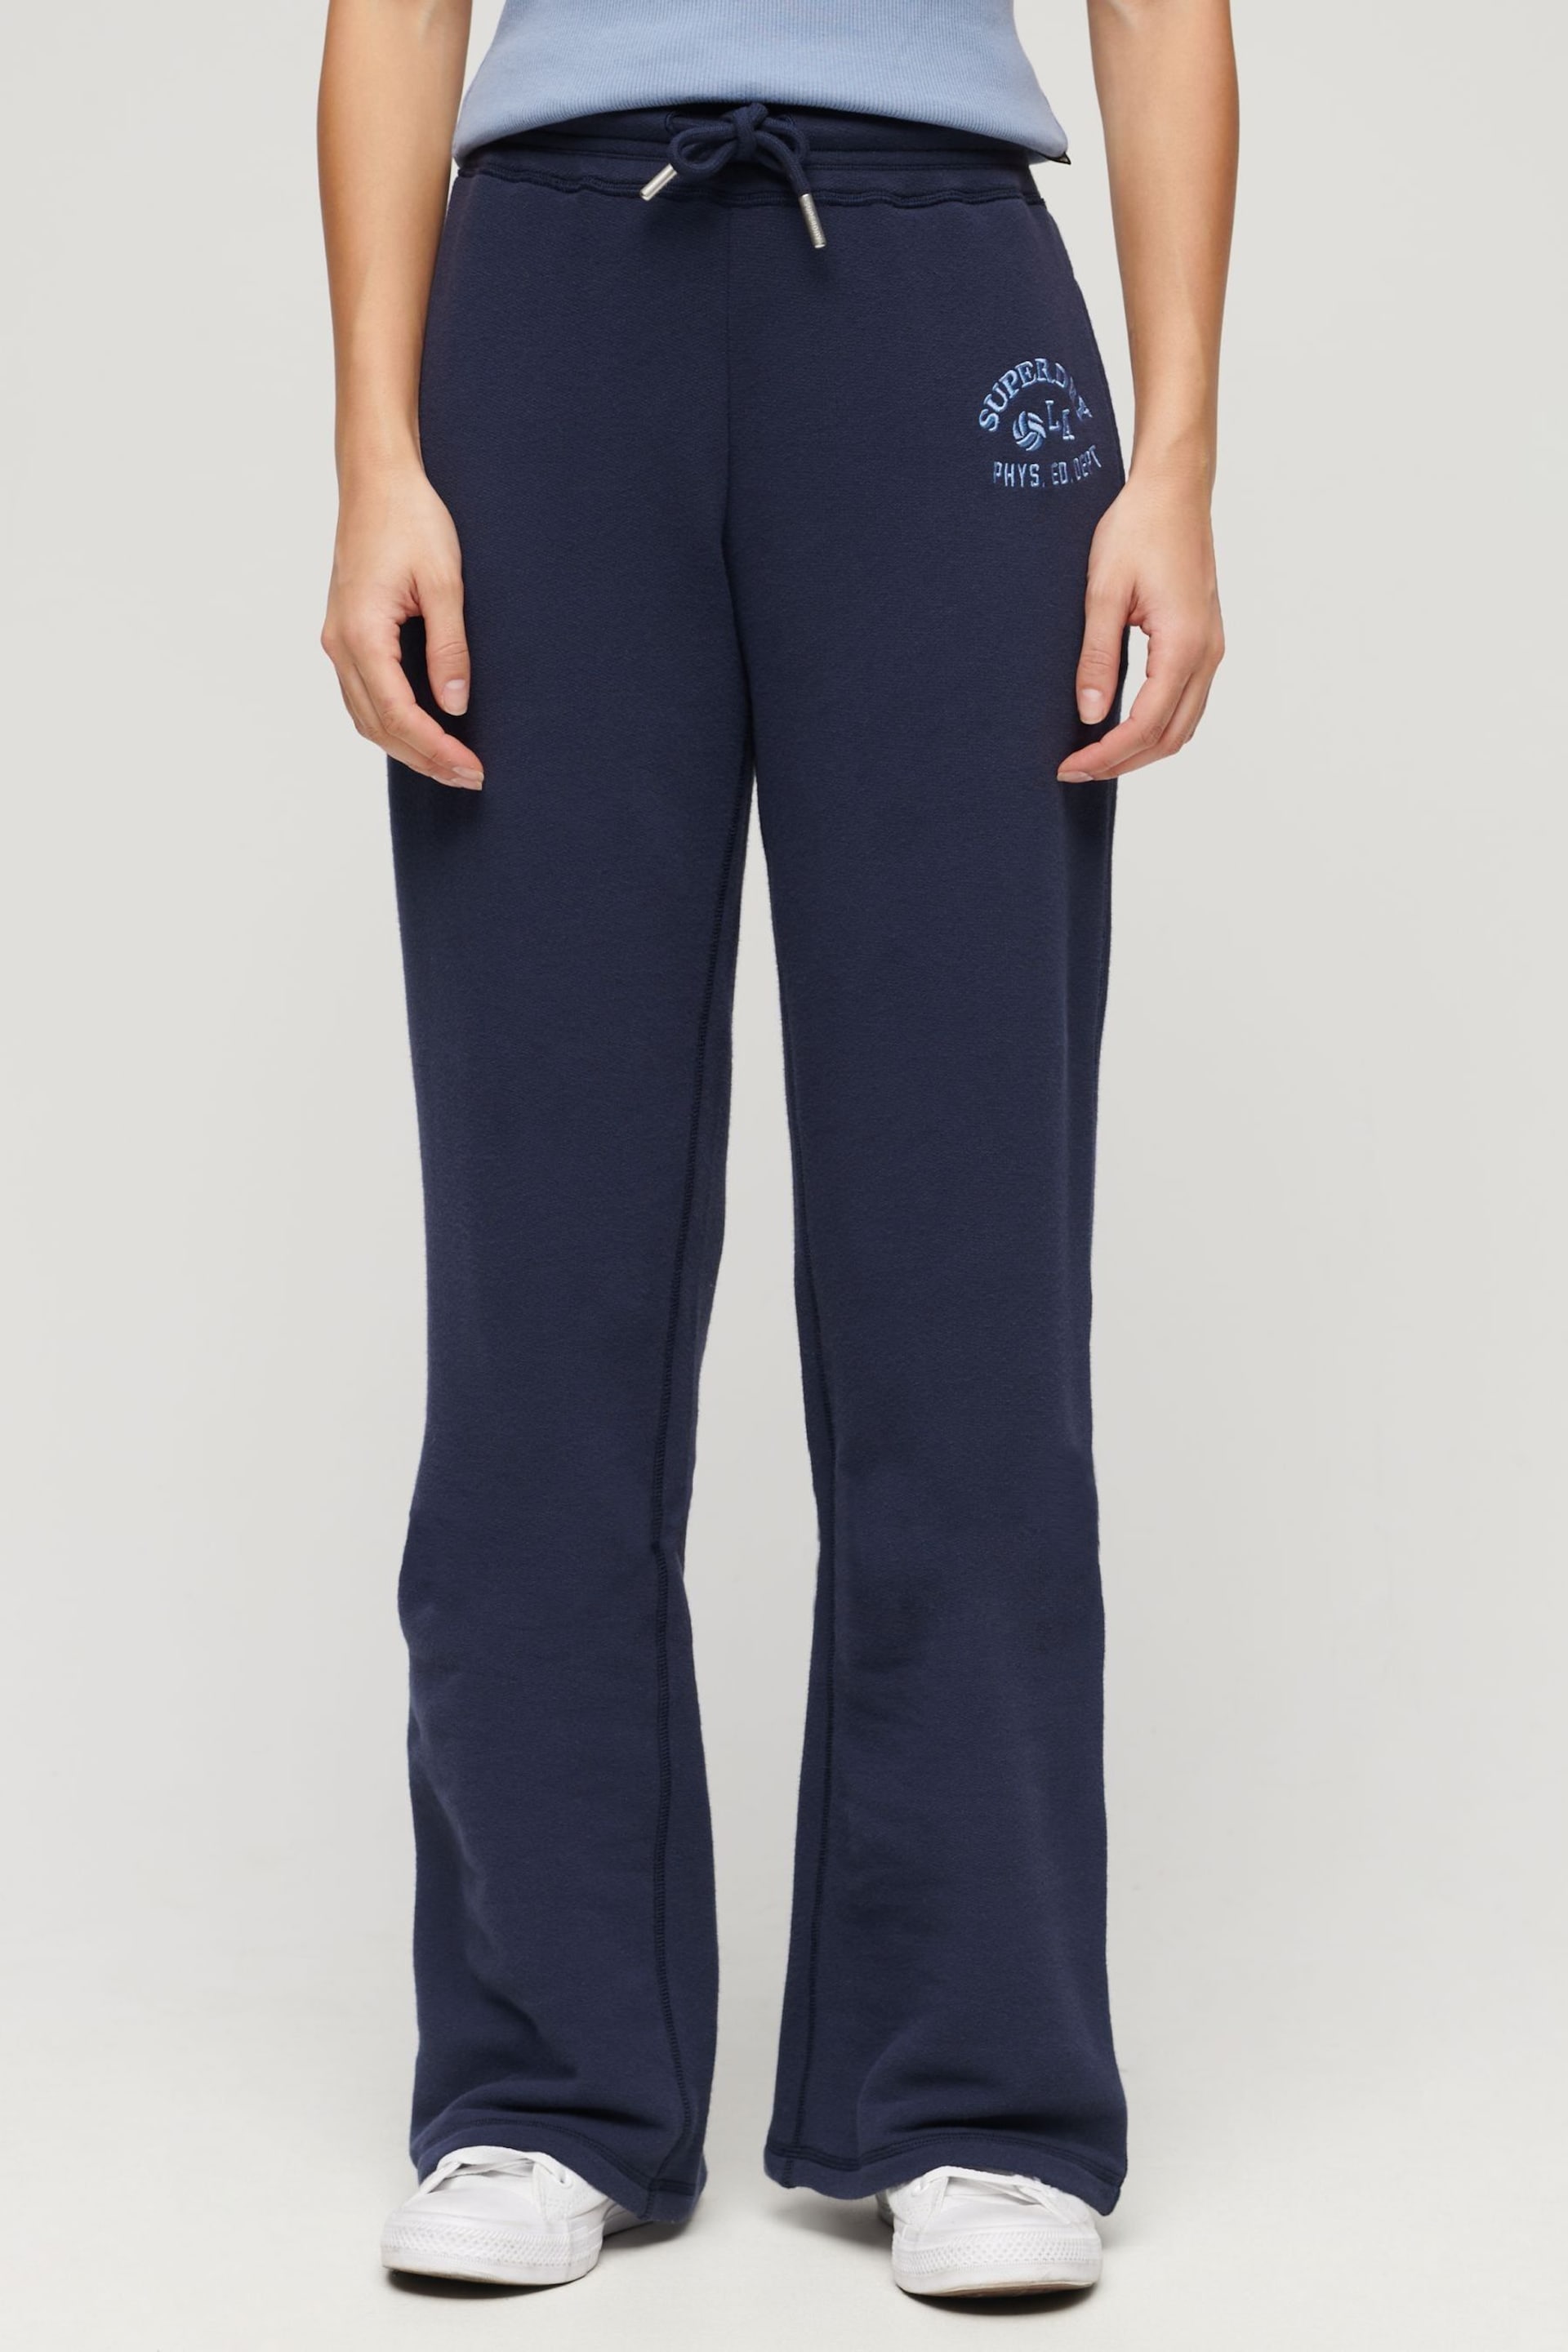 Superdry Blue Low Rise Flare Joggers - Image 1 of 6